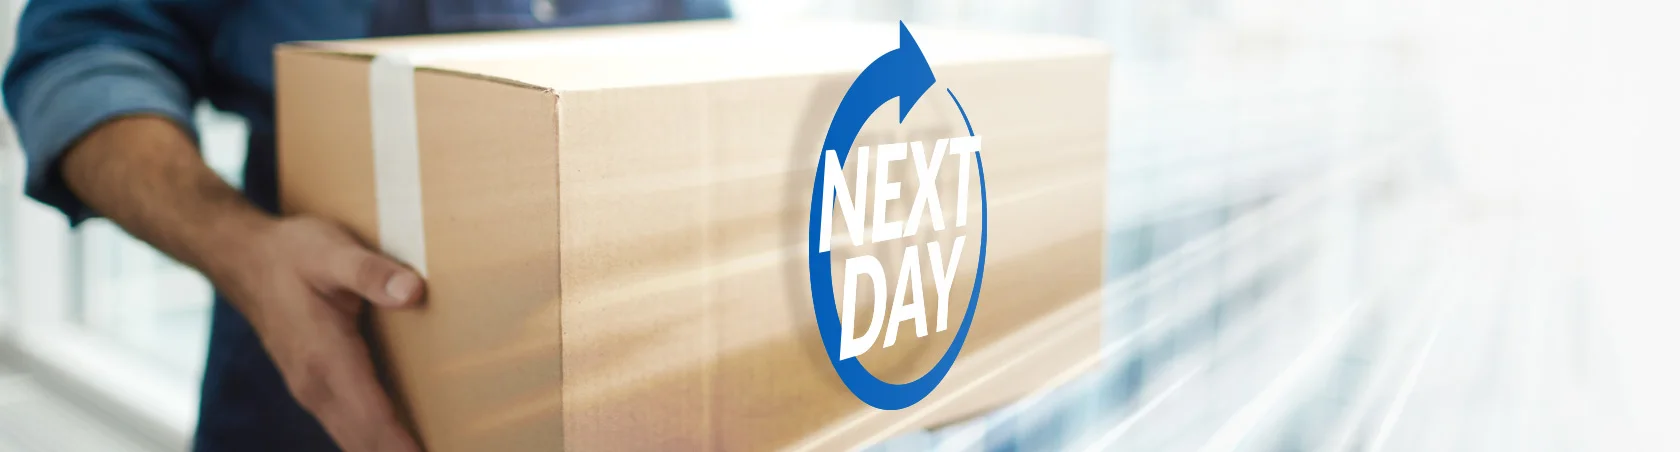 Next day icon on parcel